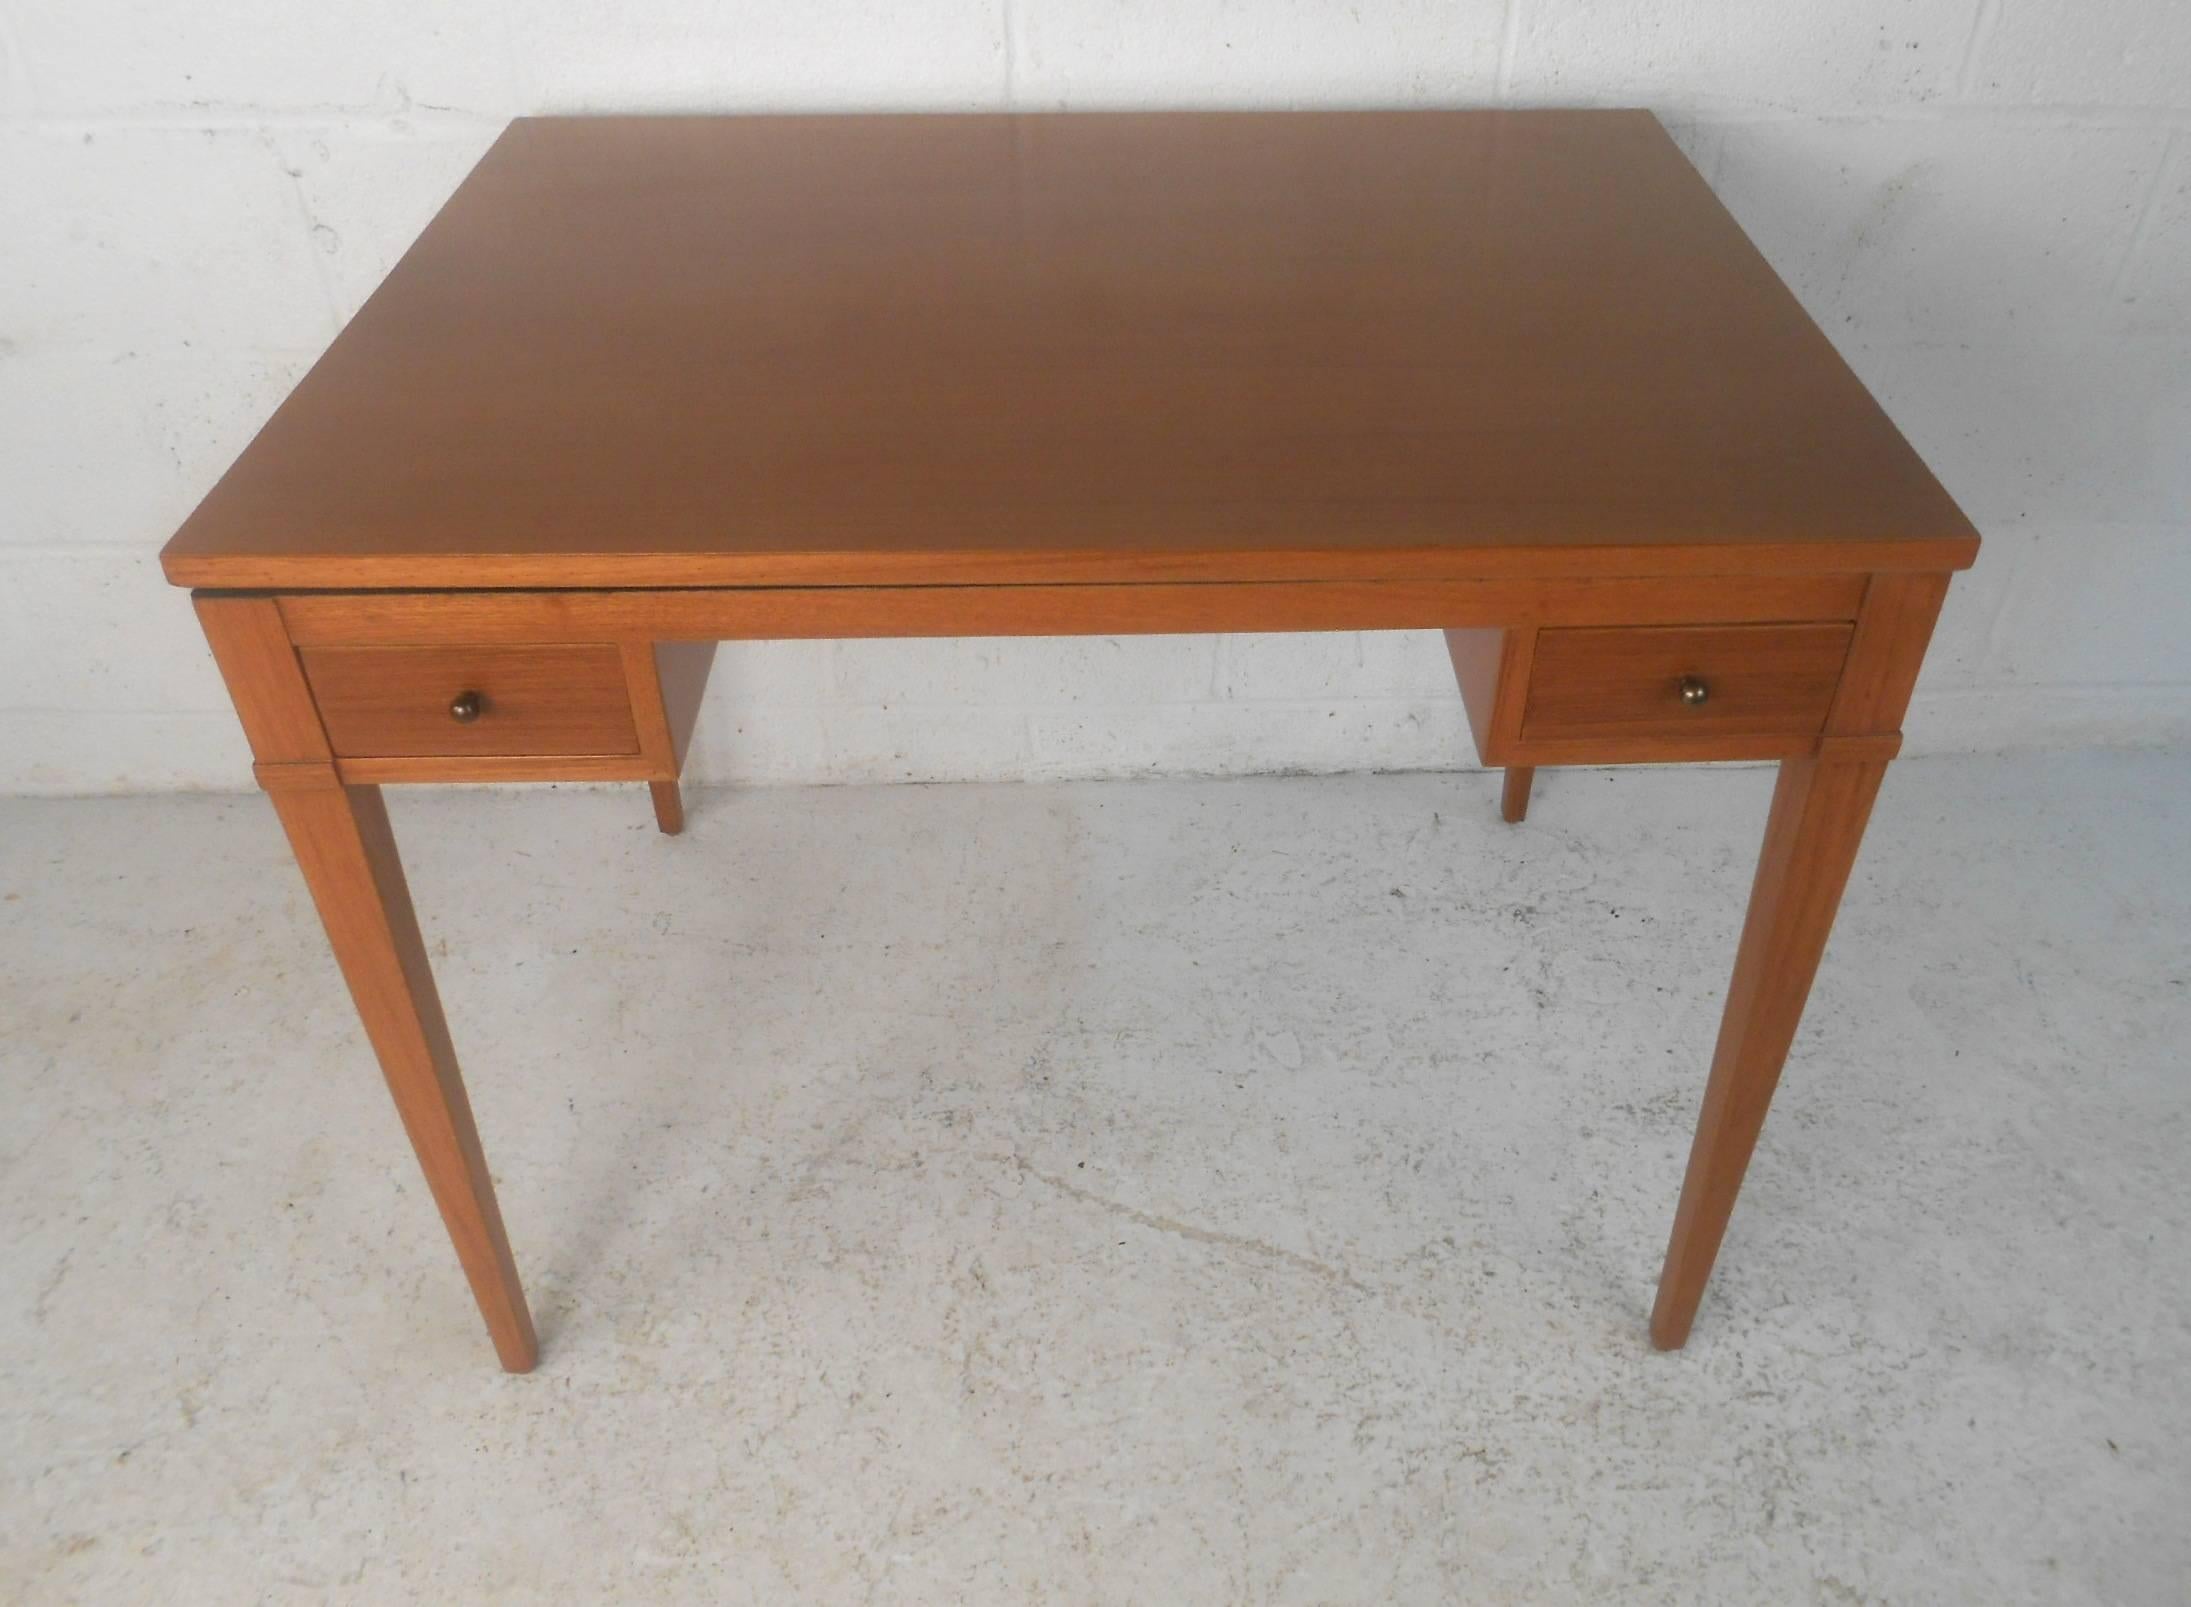 This versatile Mid-Century Modern desk has the ability to turn into a game table by flipping the top to the opposite side. Unique design has a chess board in the centre of the top on one side and a beautiful teak finish on the other side. Lovely